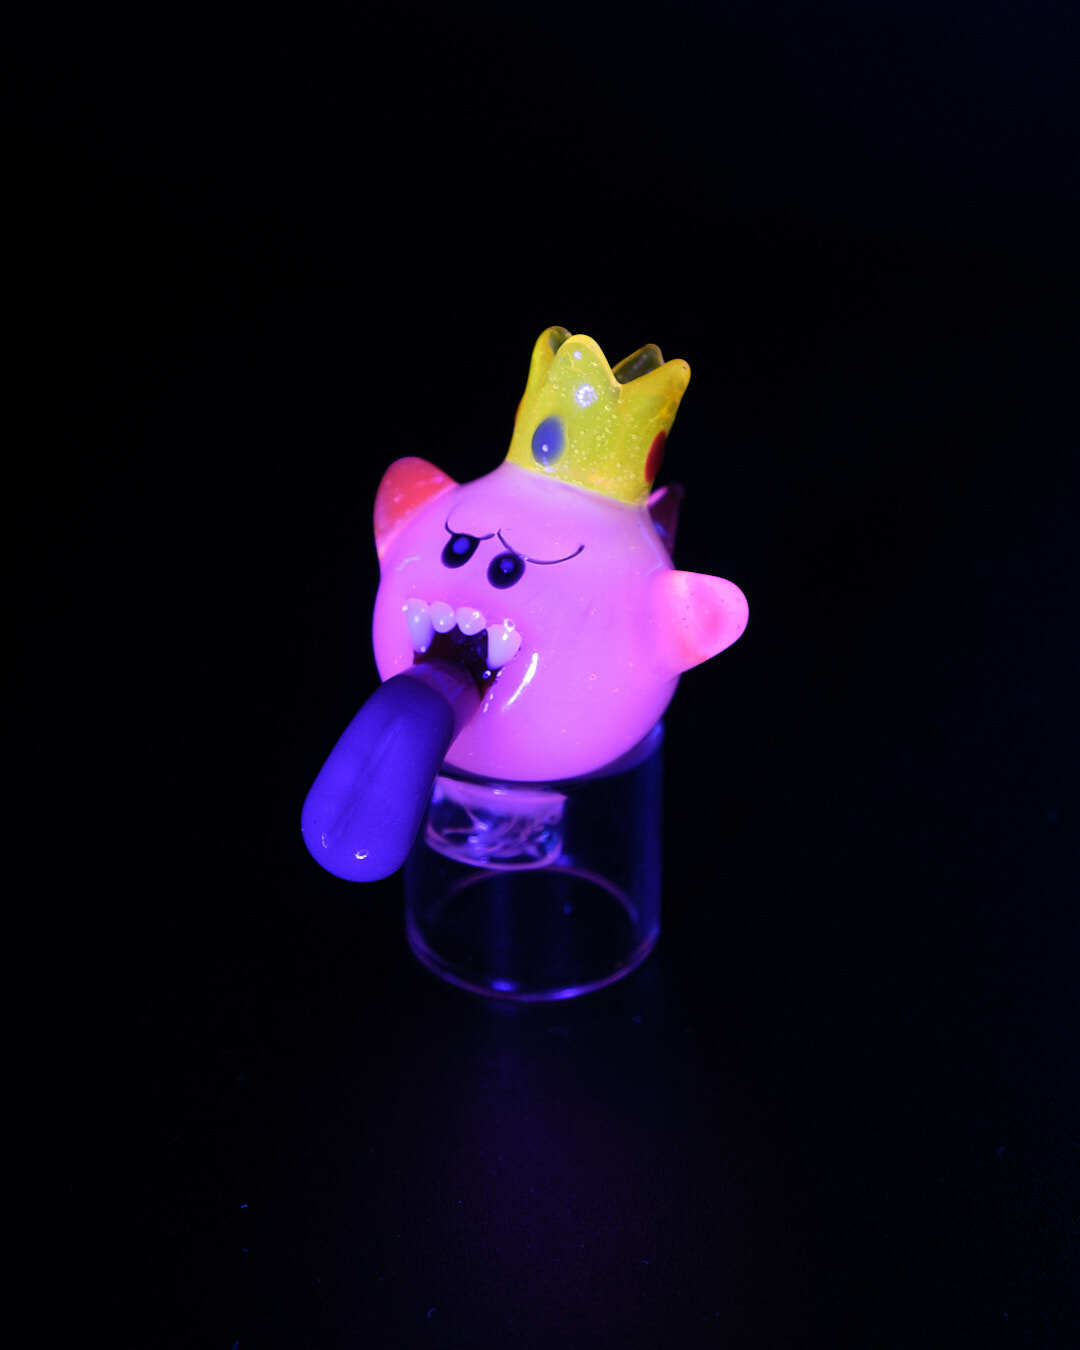 soft design of the King Boo UV Reactive Spinner Carb Cap by Saiyan Glass